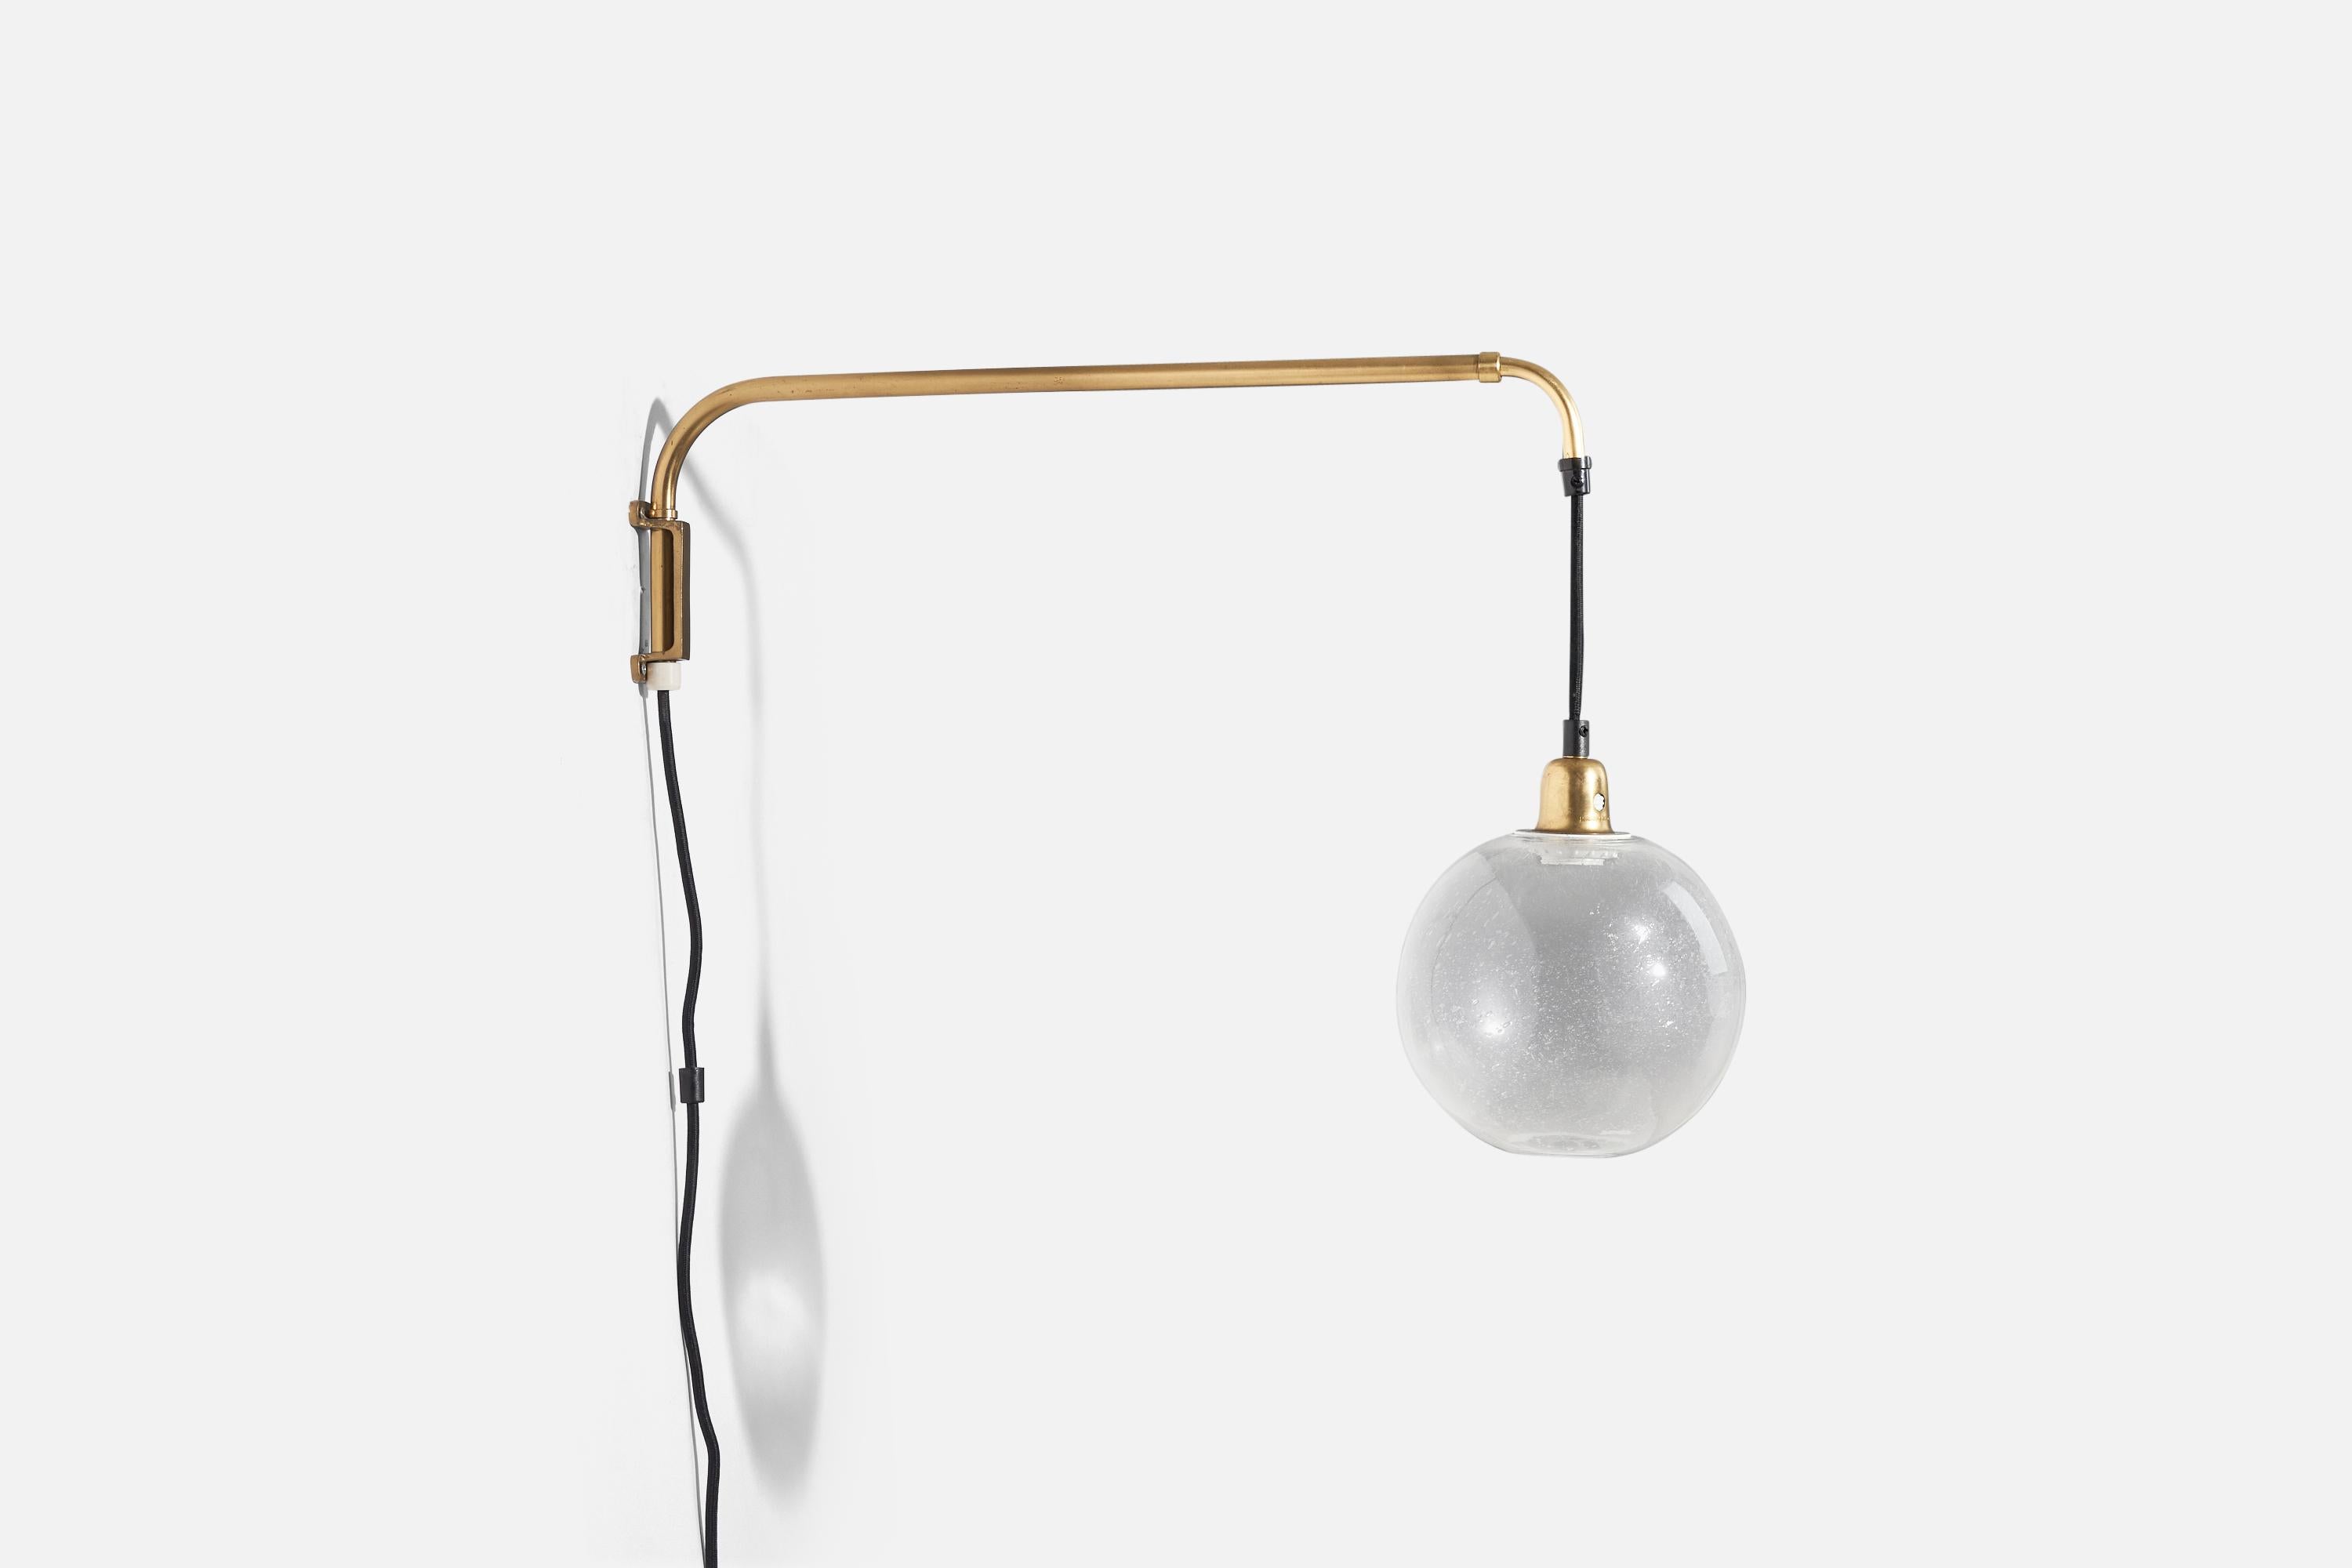 A brass and glass wall light designed and produced in Sweden, c. 1950s.

Variable dimensions, measured as illustrated in the first image.
 